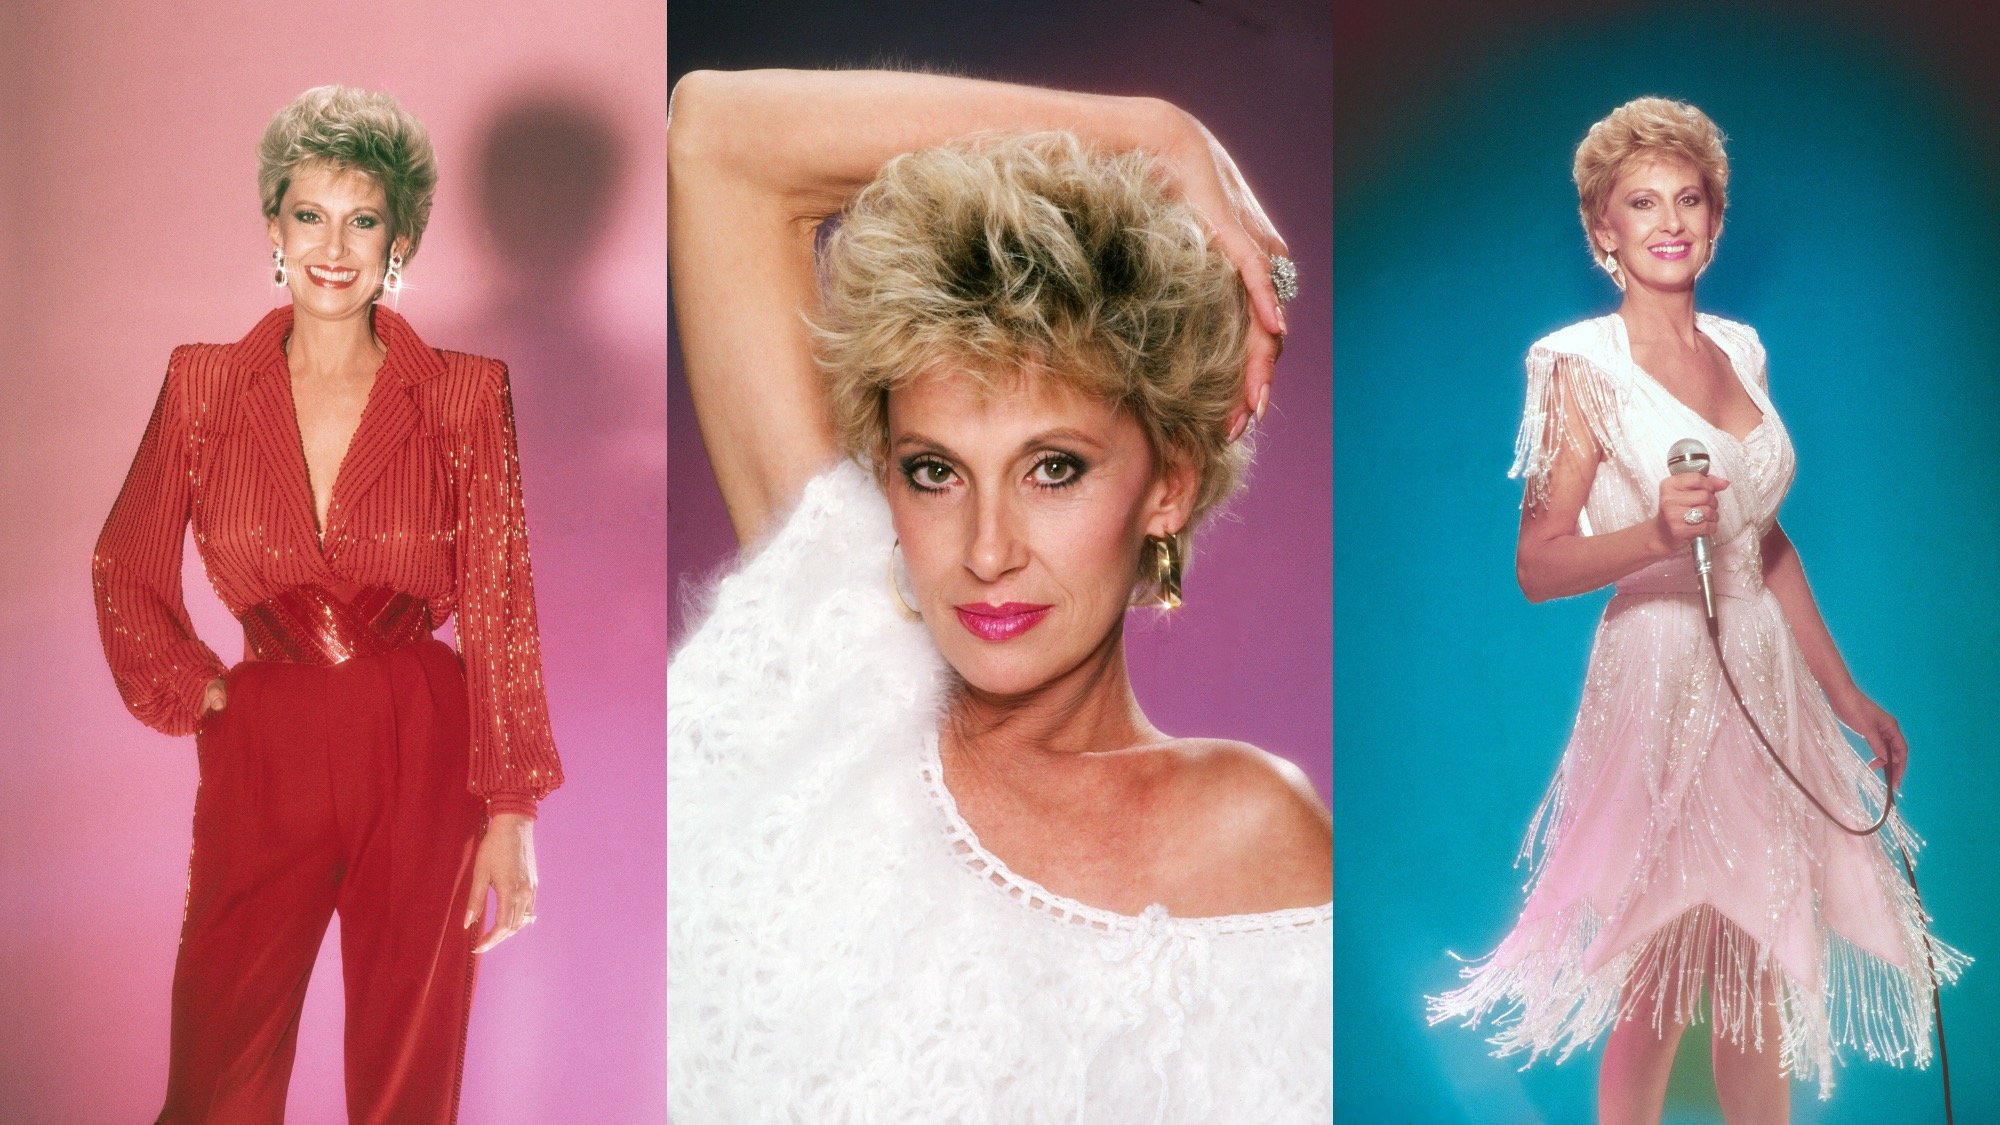 Side-by-side images of Tammy Wynette, c. 1984, who friends said never quite realized her fame.